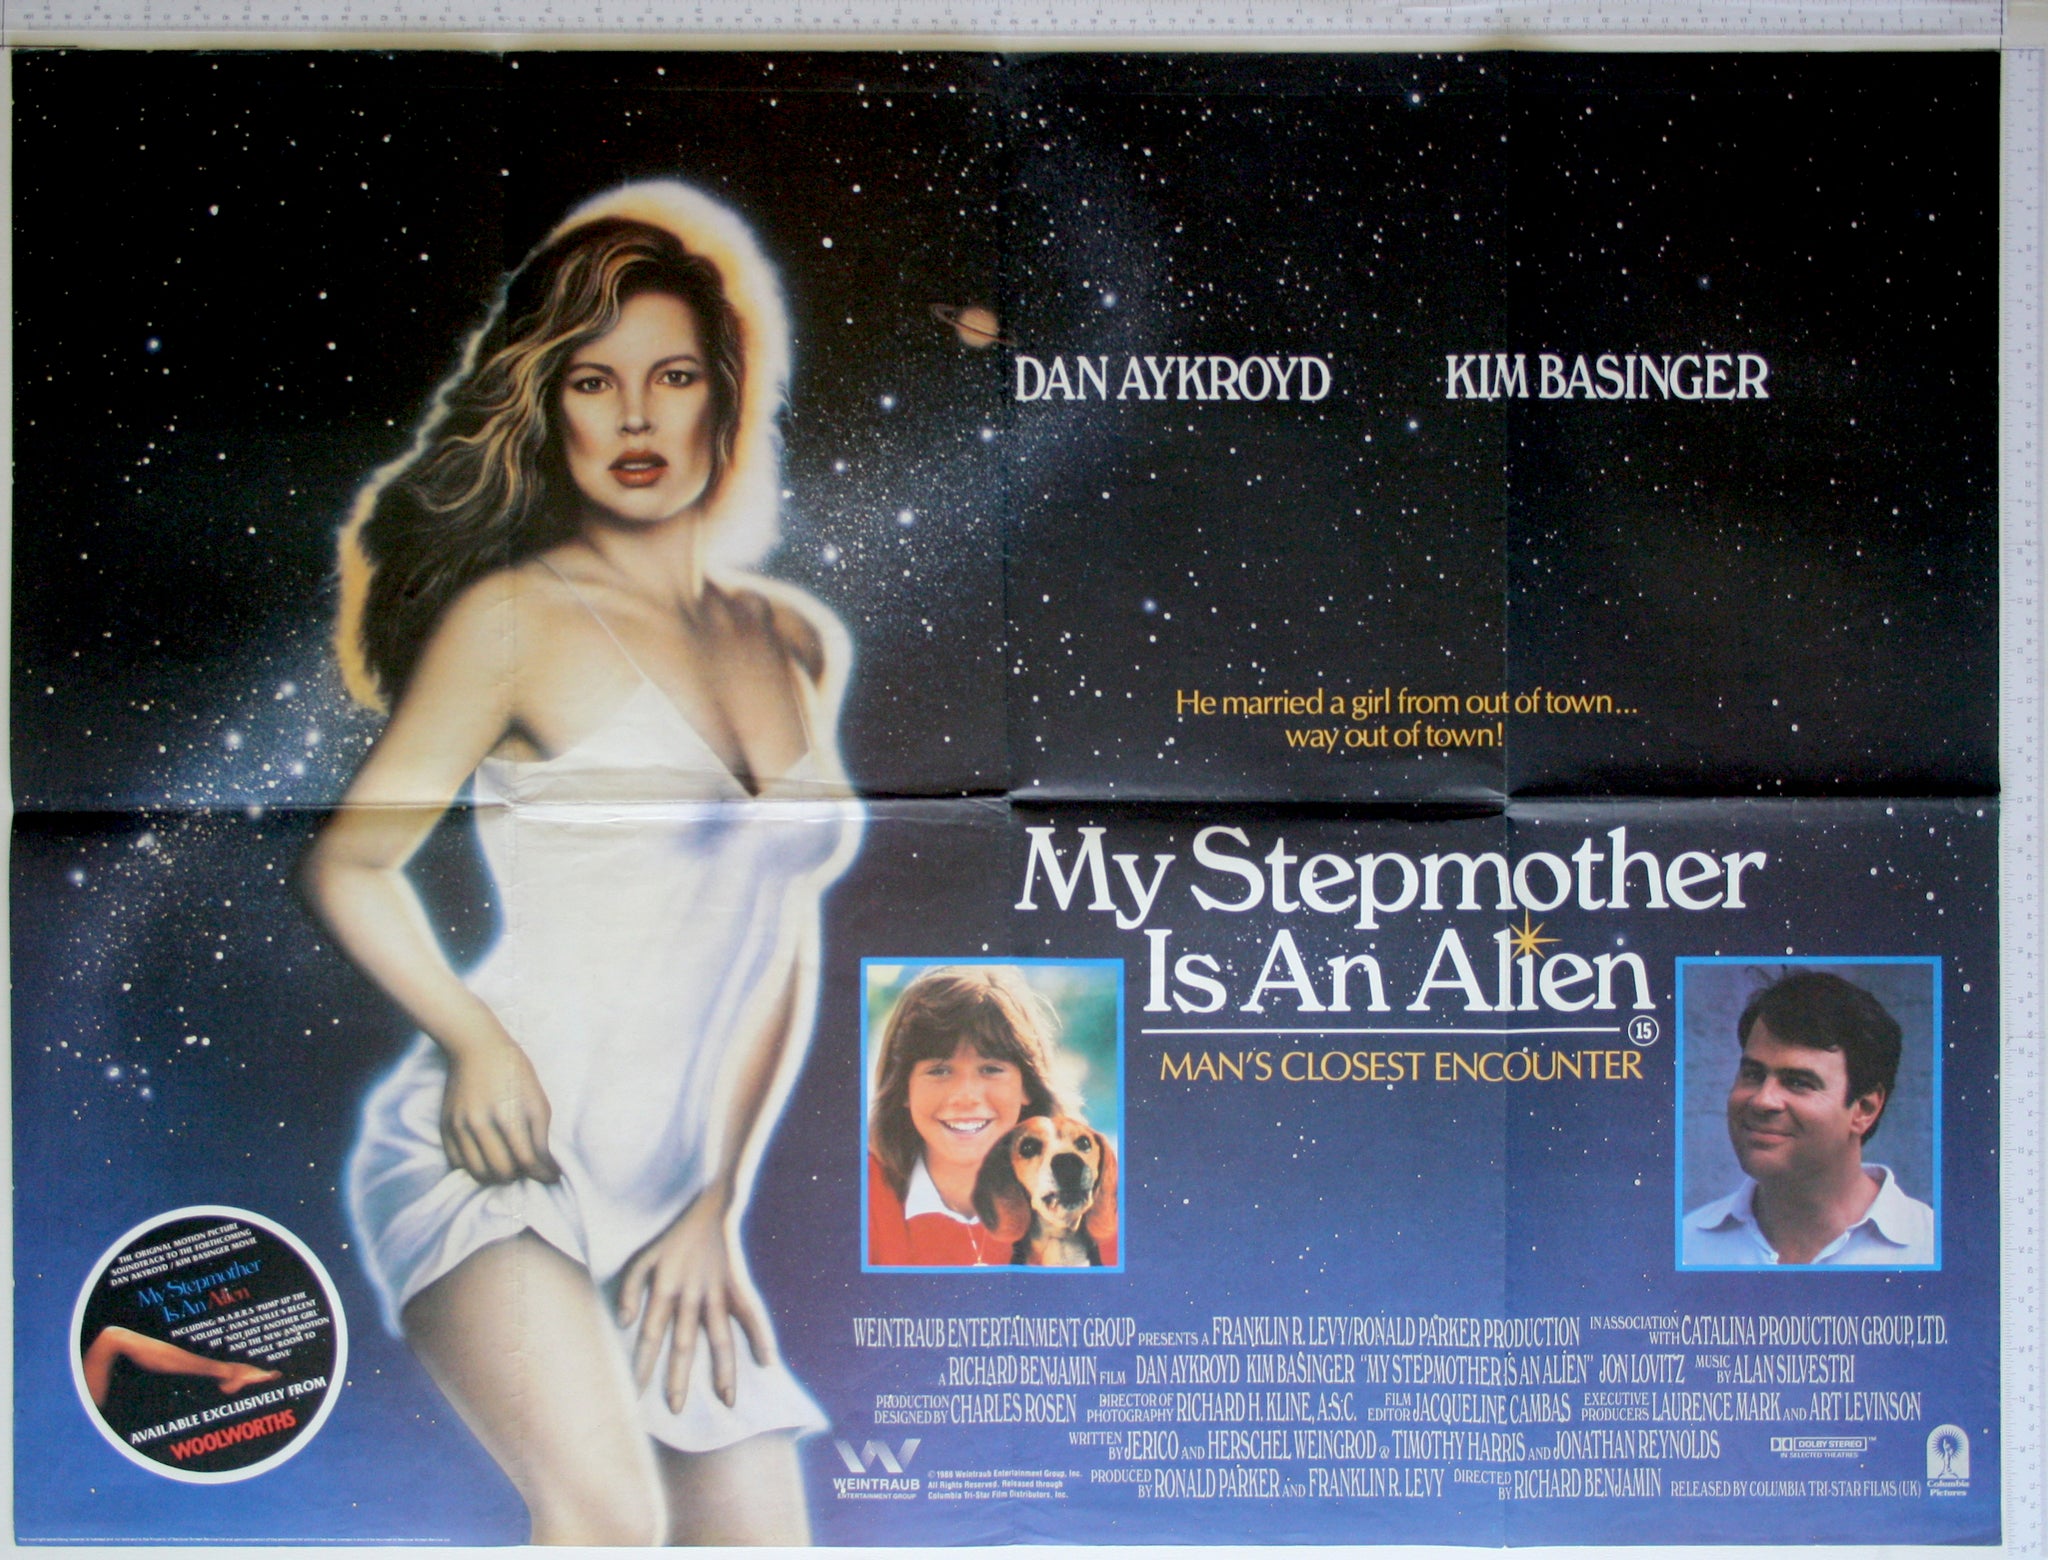 On star background, airbrushed figure of Basinger, with two inset photos of girl and man.